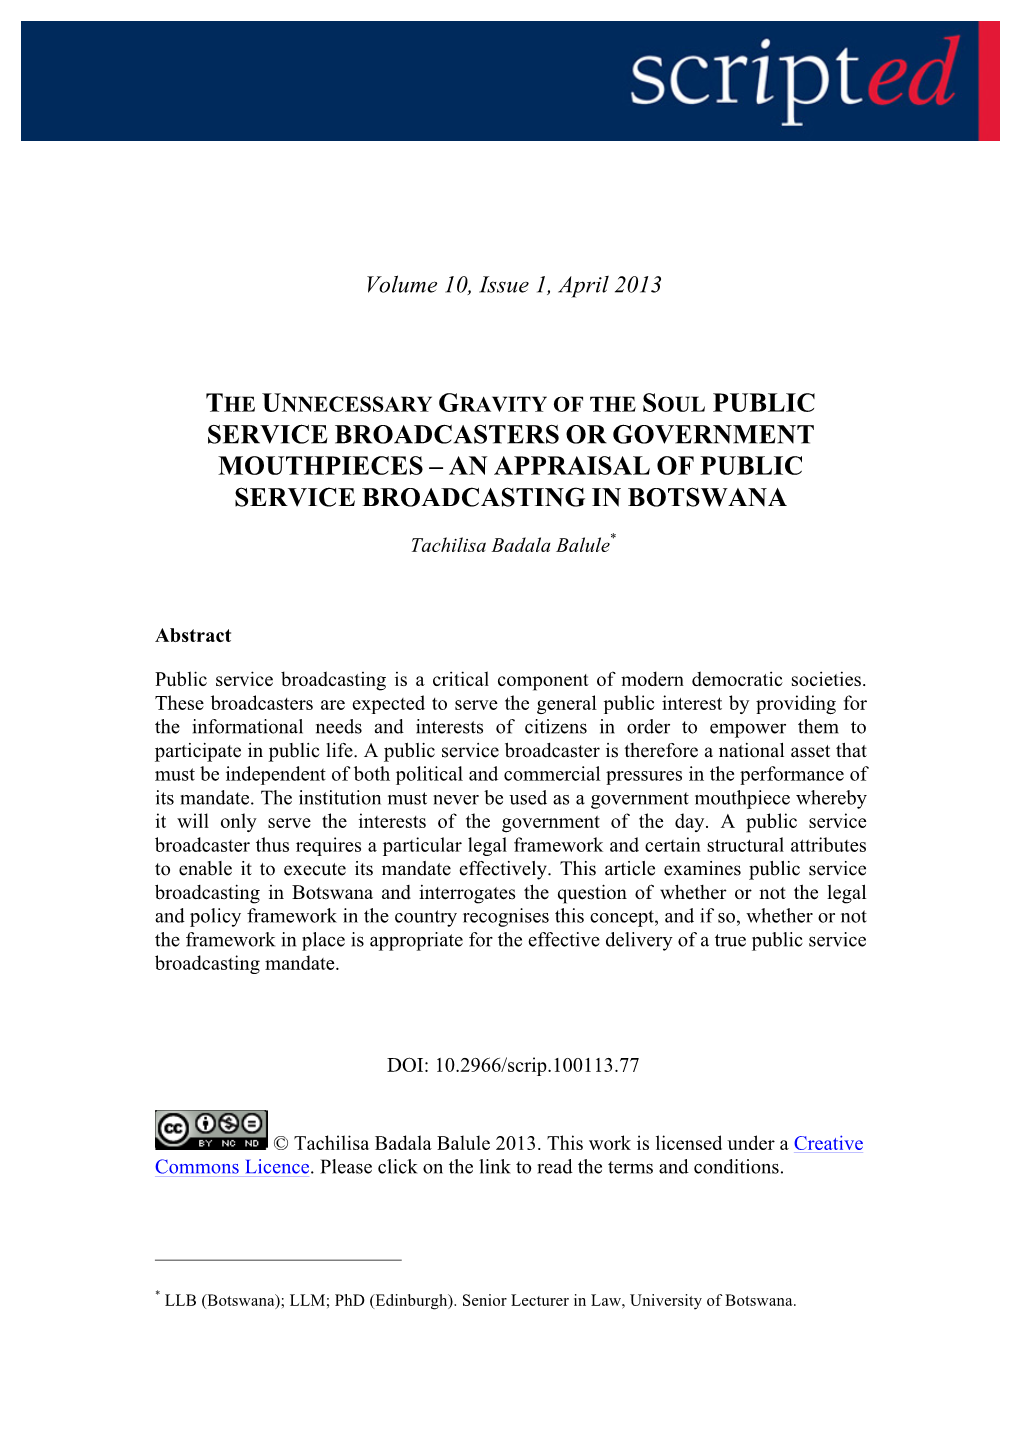 Service Broadcasters Or Government Mouthpieces – an Appraisal of Public Service Broadcasting in Botswana